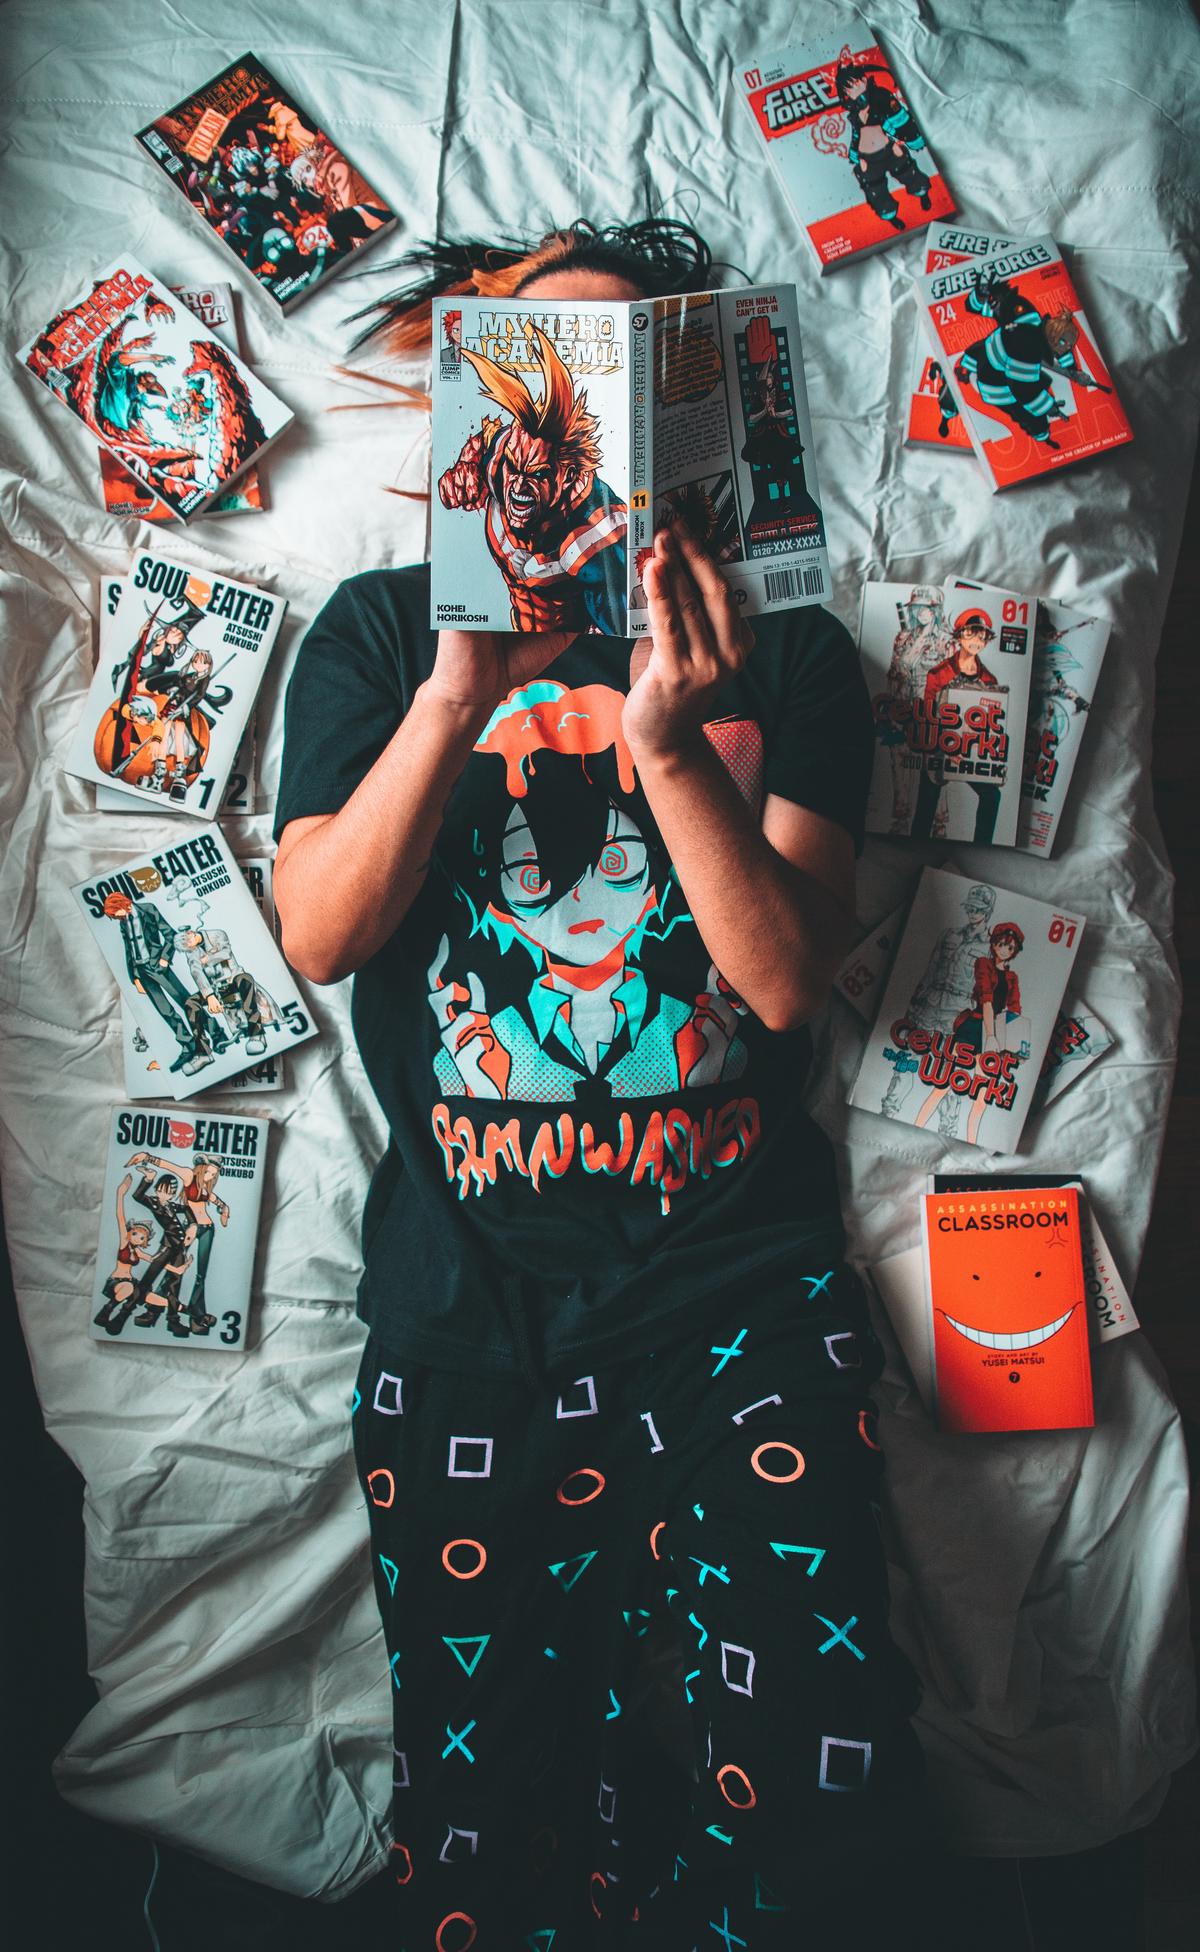 Ilustration of a person reading a manga on a digital device with multiple manga covers floating around them